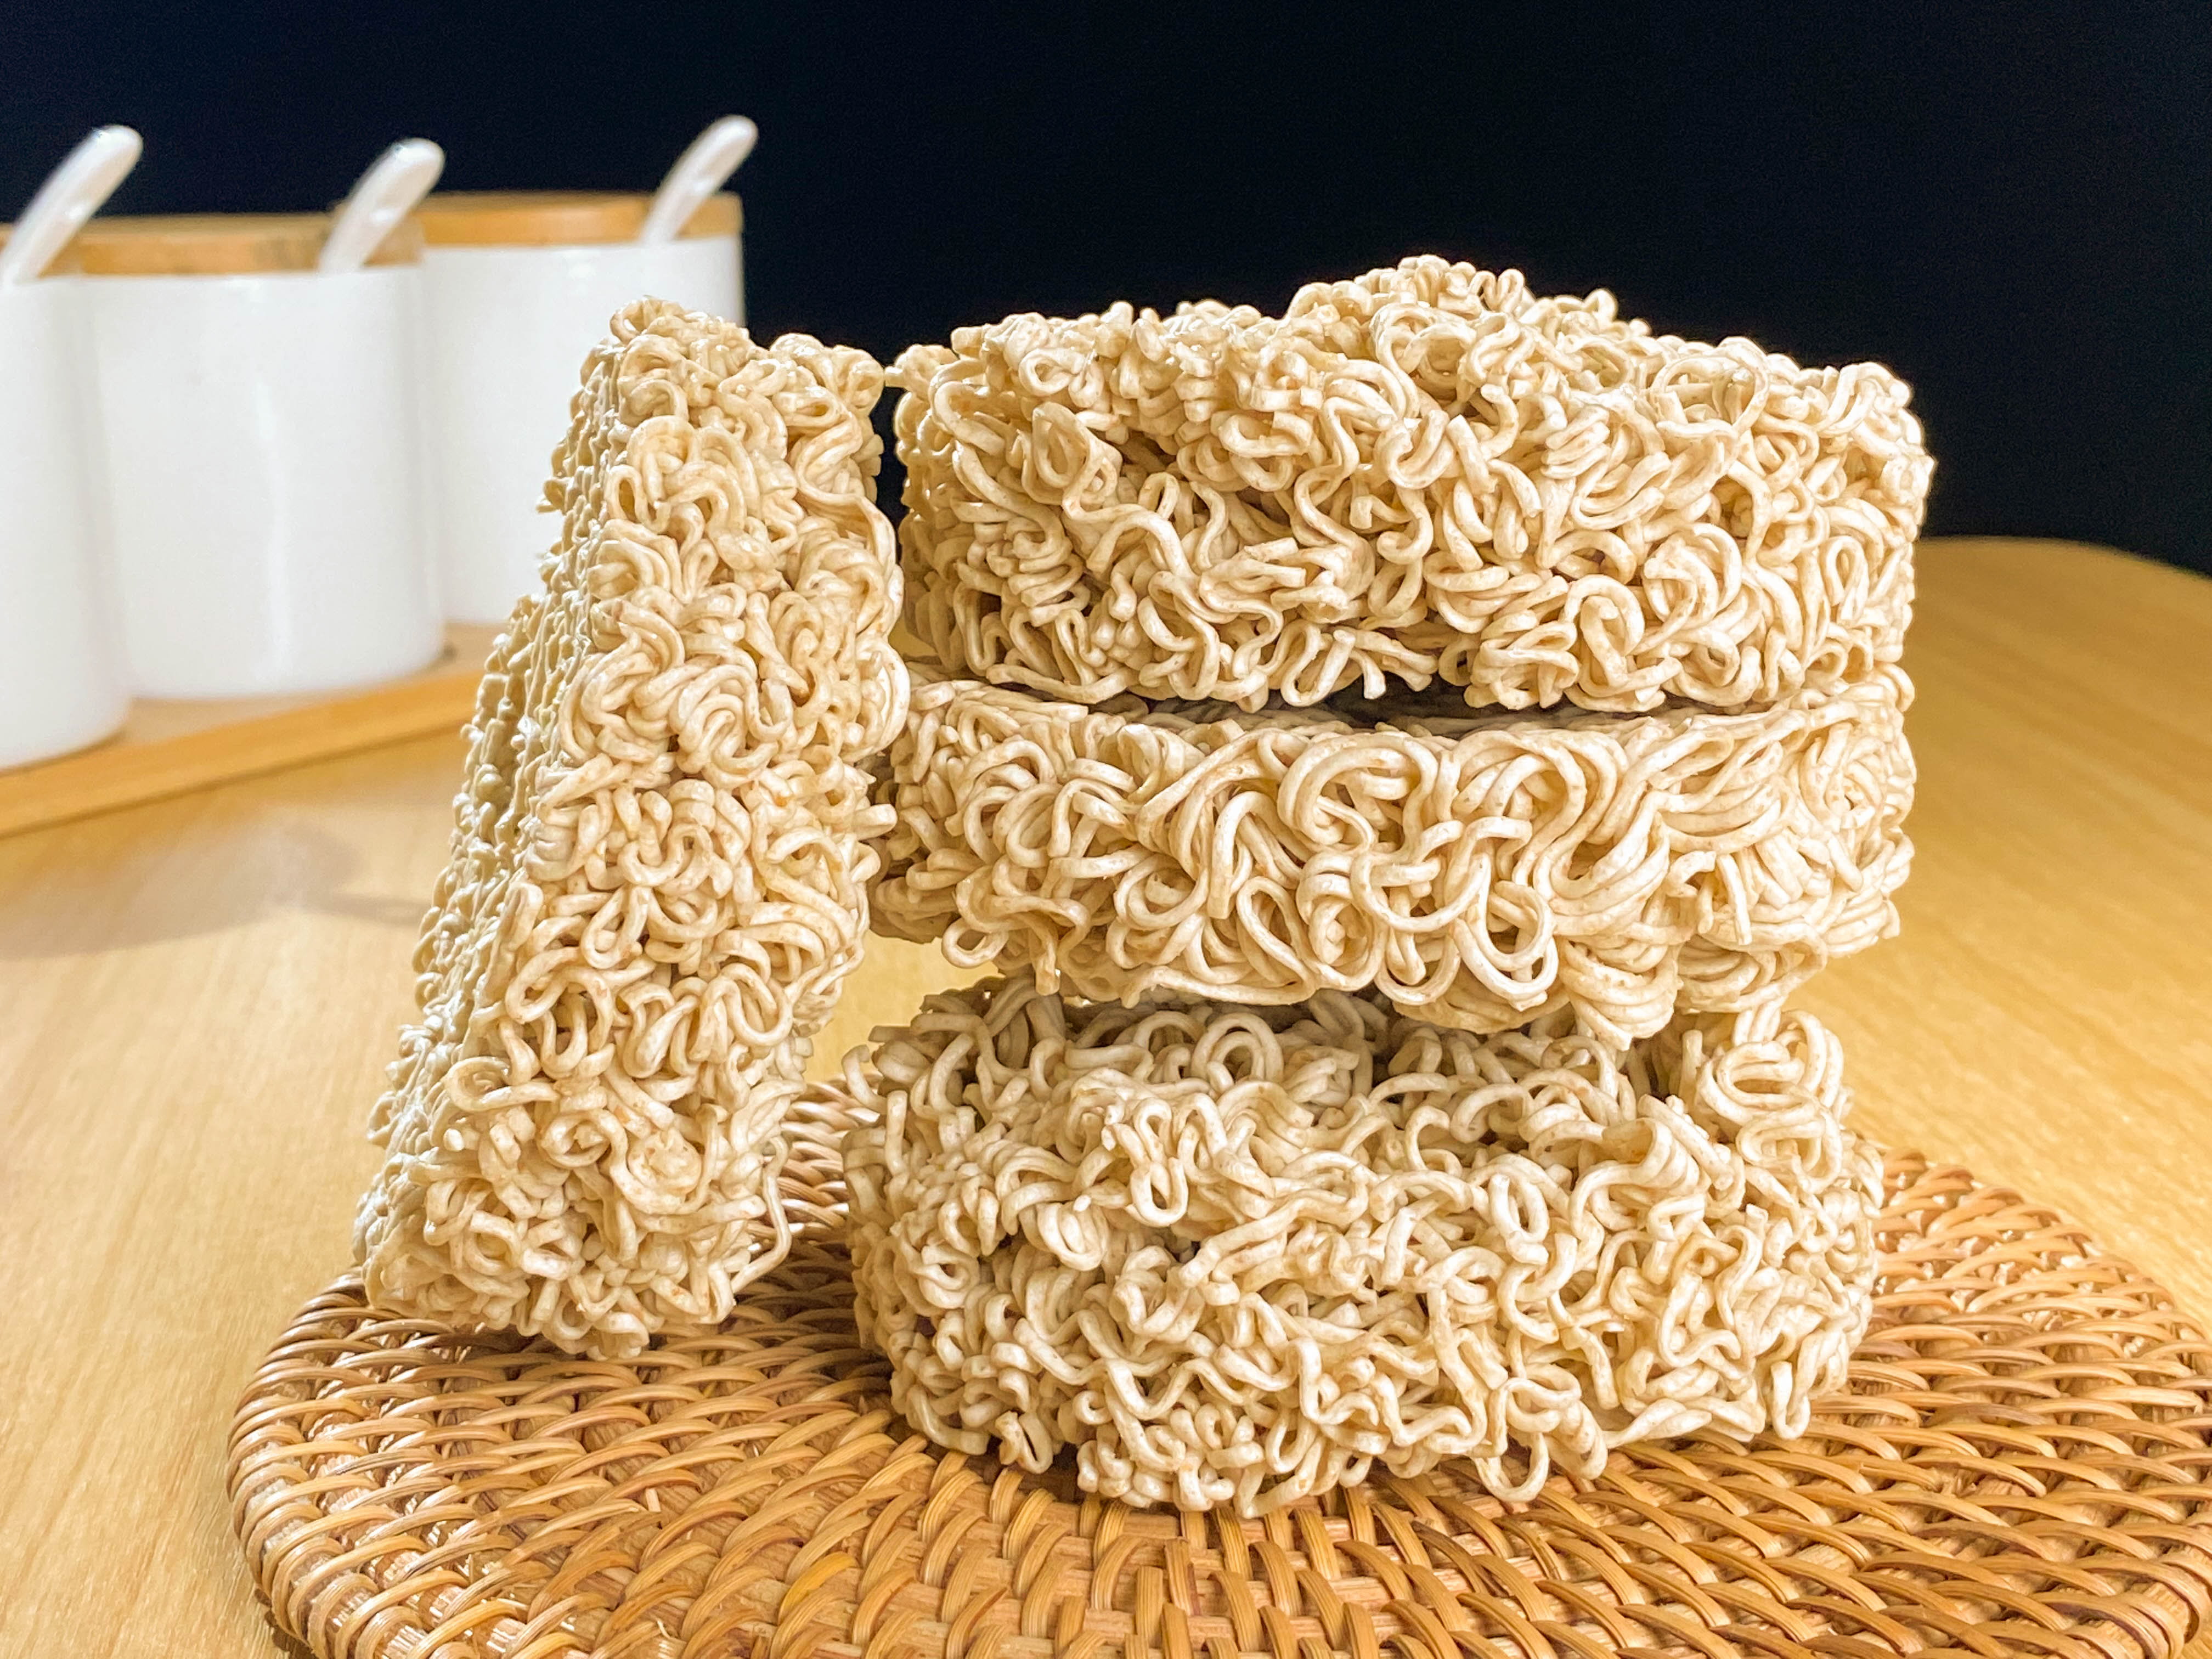 How To Cook The Whole Wheat Noodles?